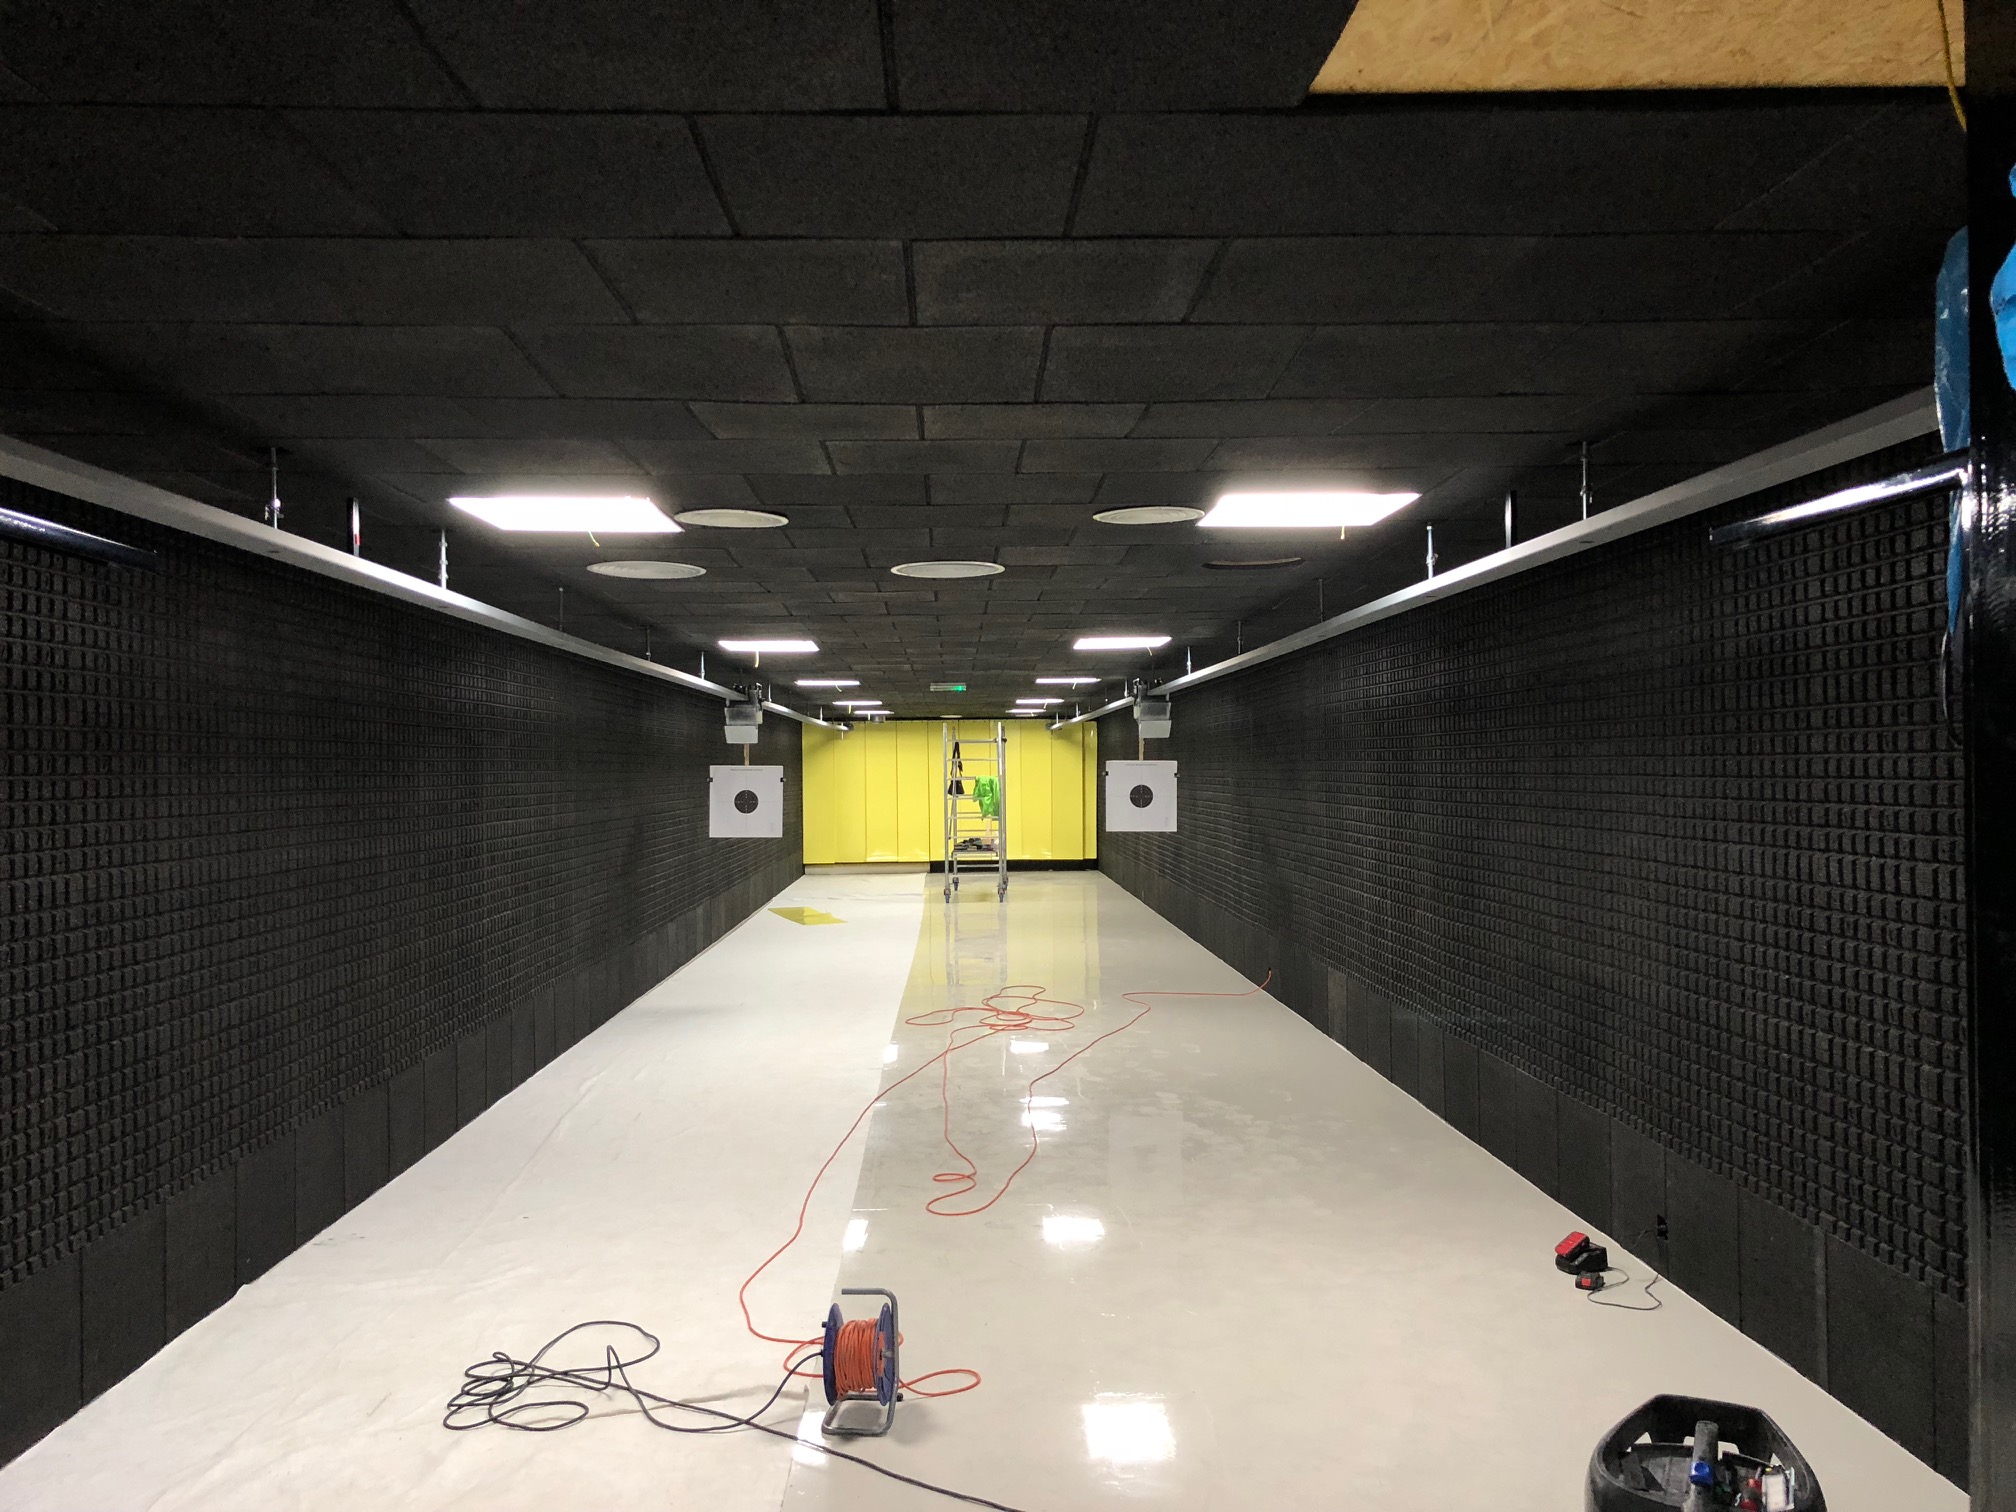 A new test shooting range is being built in the ANTREG premises